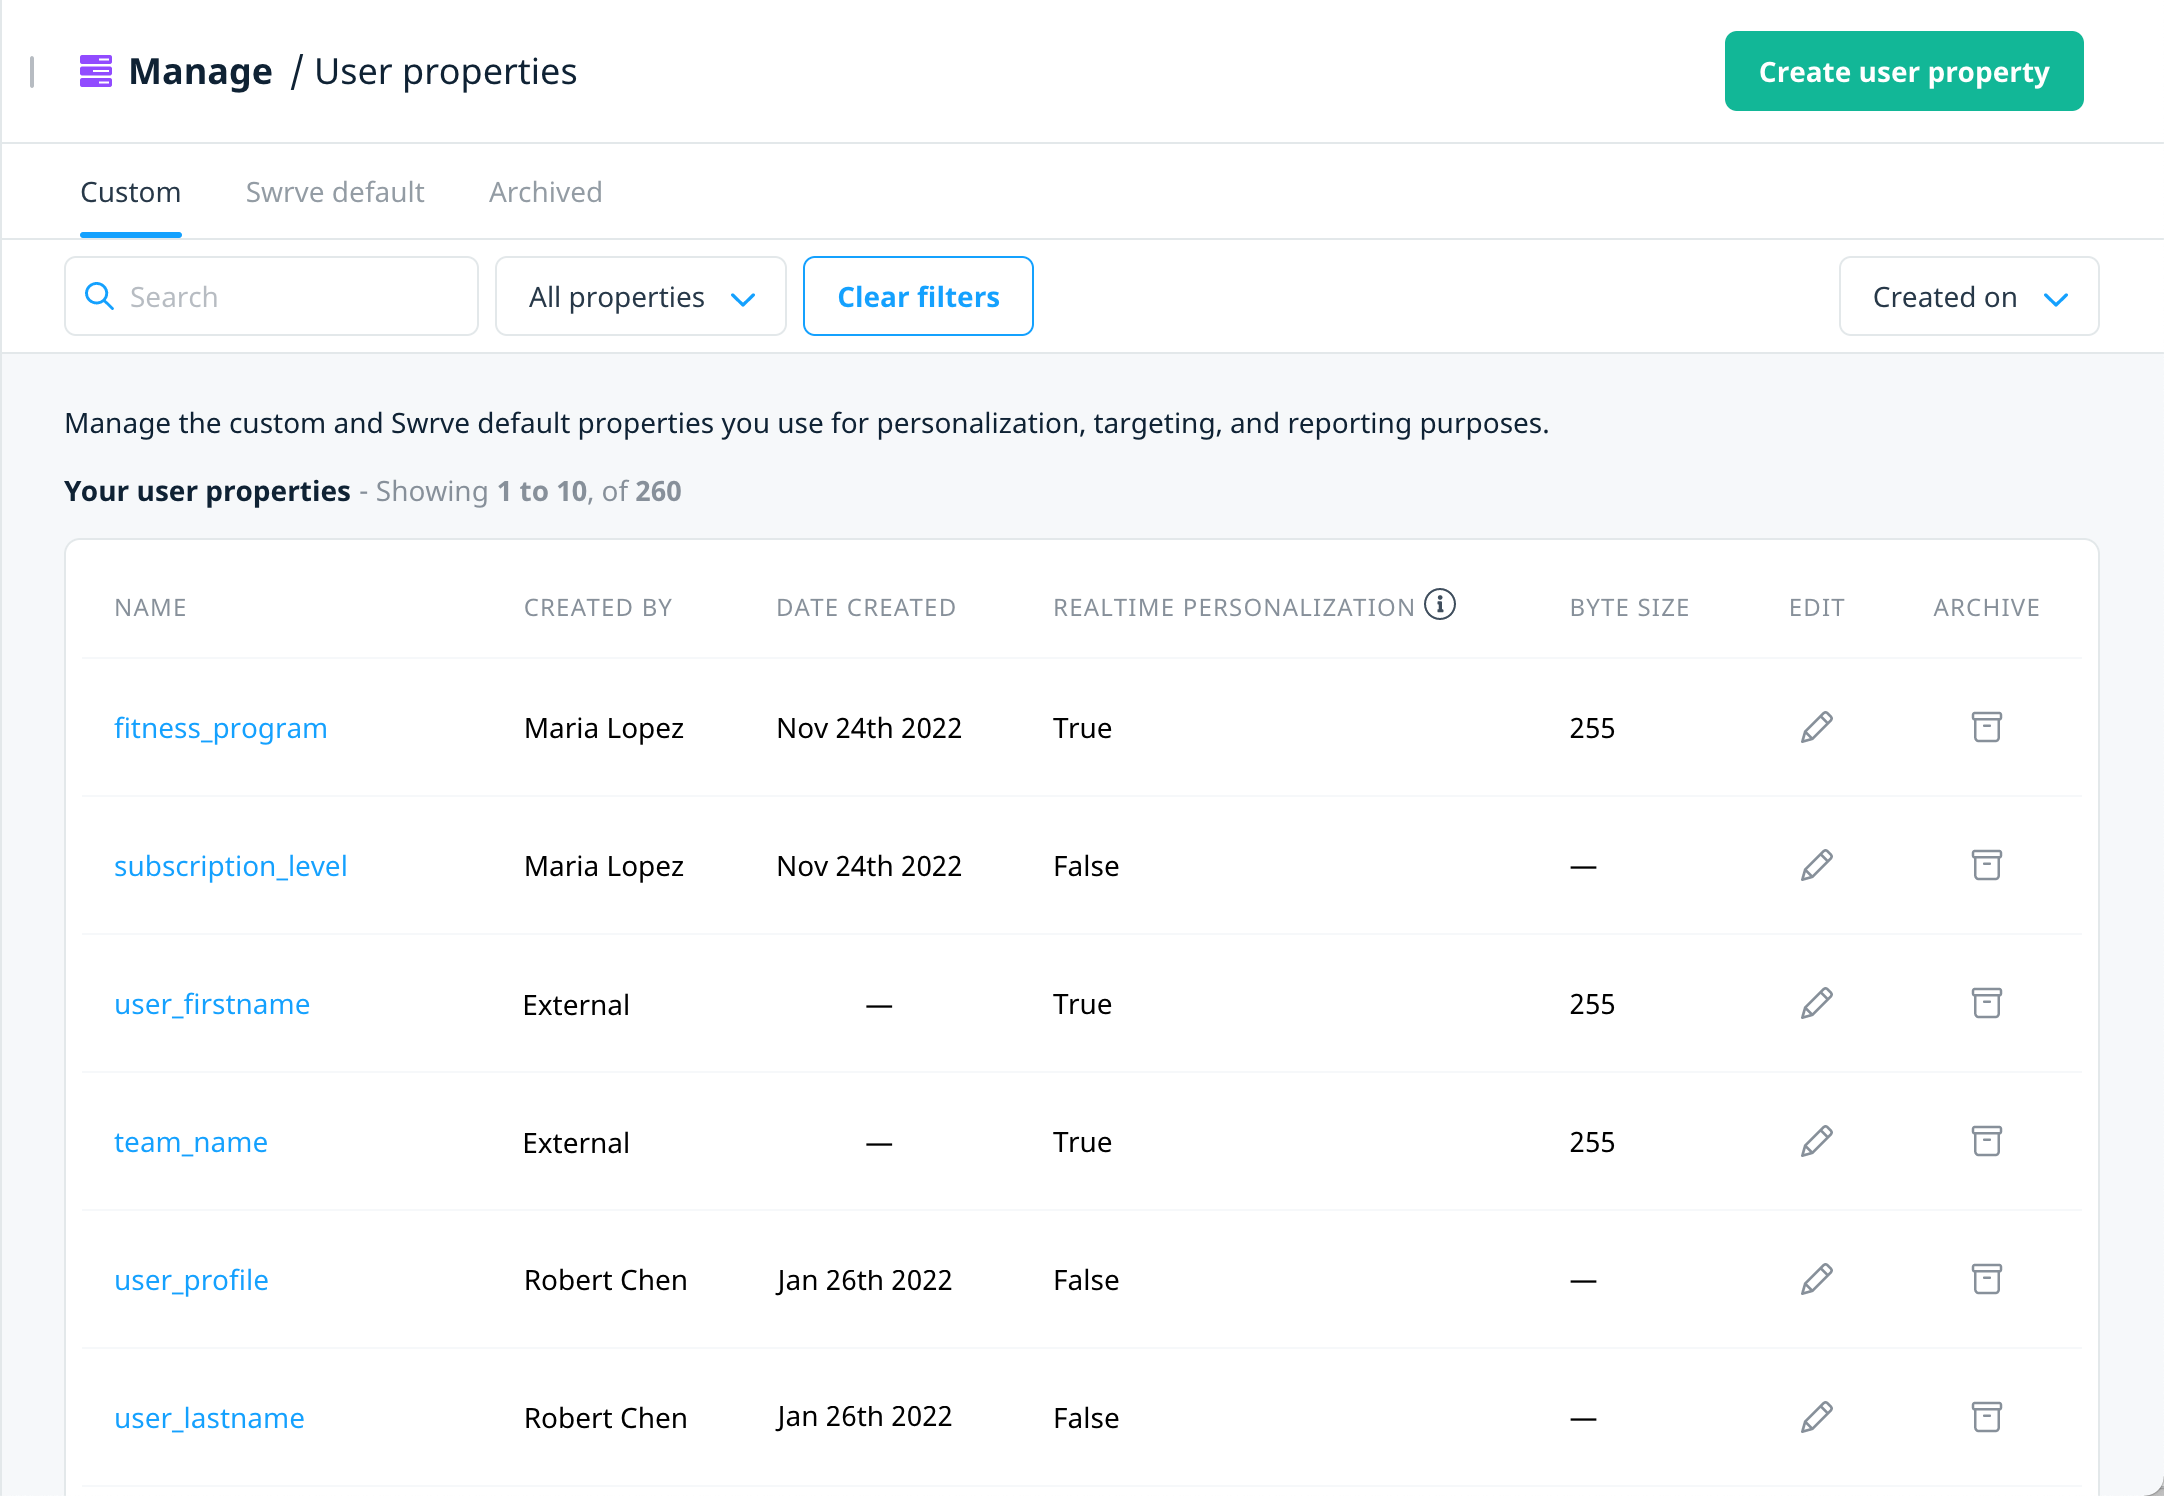 The Manage user properties screen, showing a list of custom and realtime user properties available in your app. It also has a green button for creating a new user property, a pencil icon in each row to update the property, and a file box icon for archiving a property.